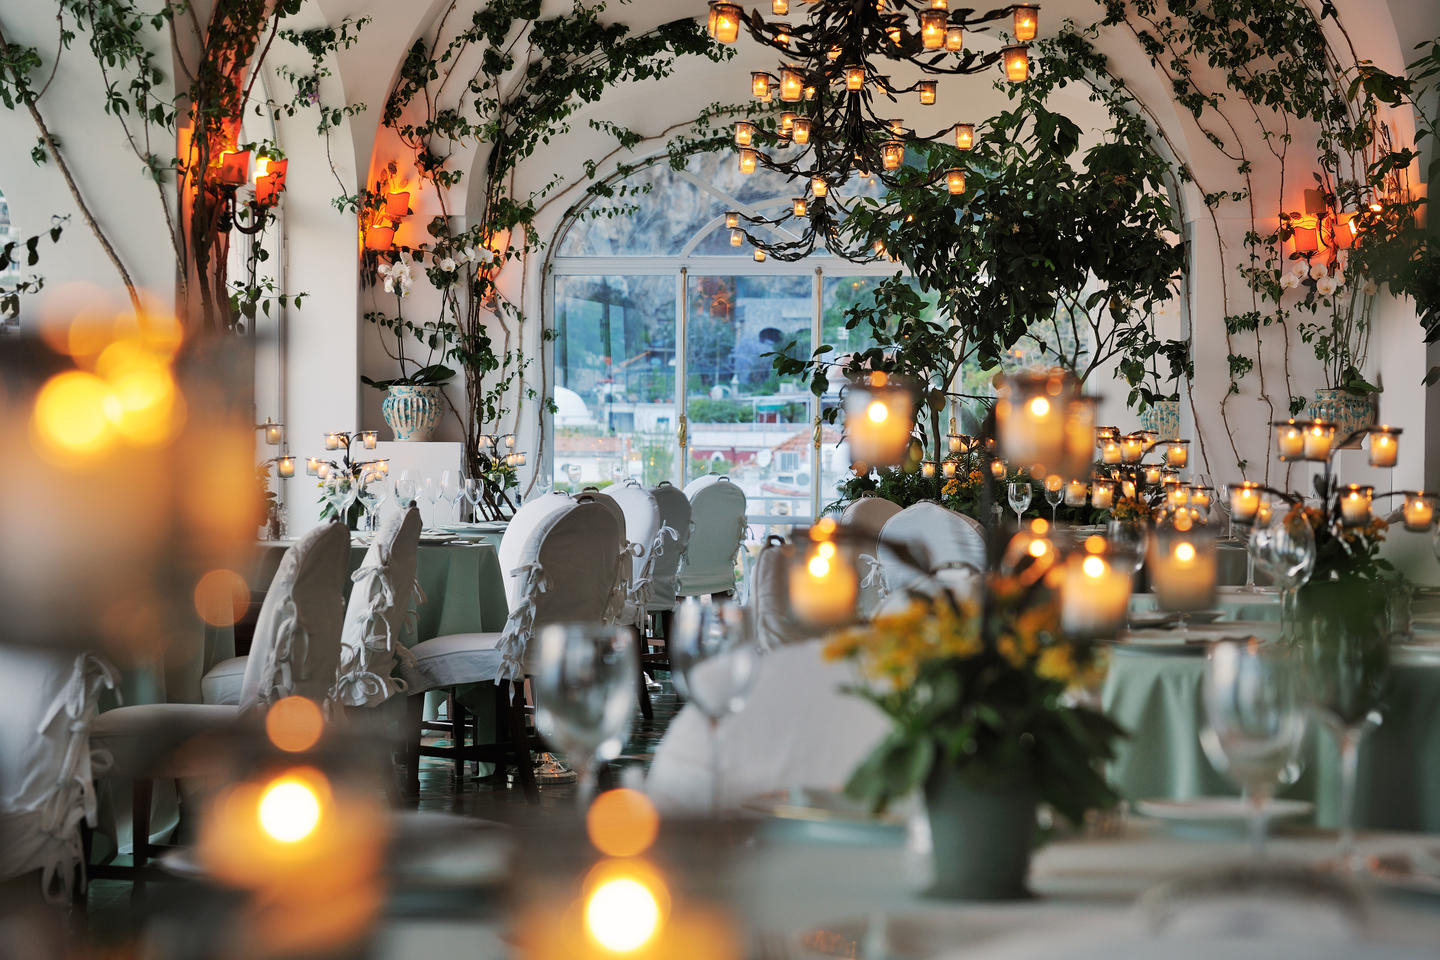 11 Of The World's Most Beautiful Restaurants